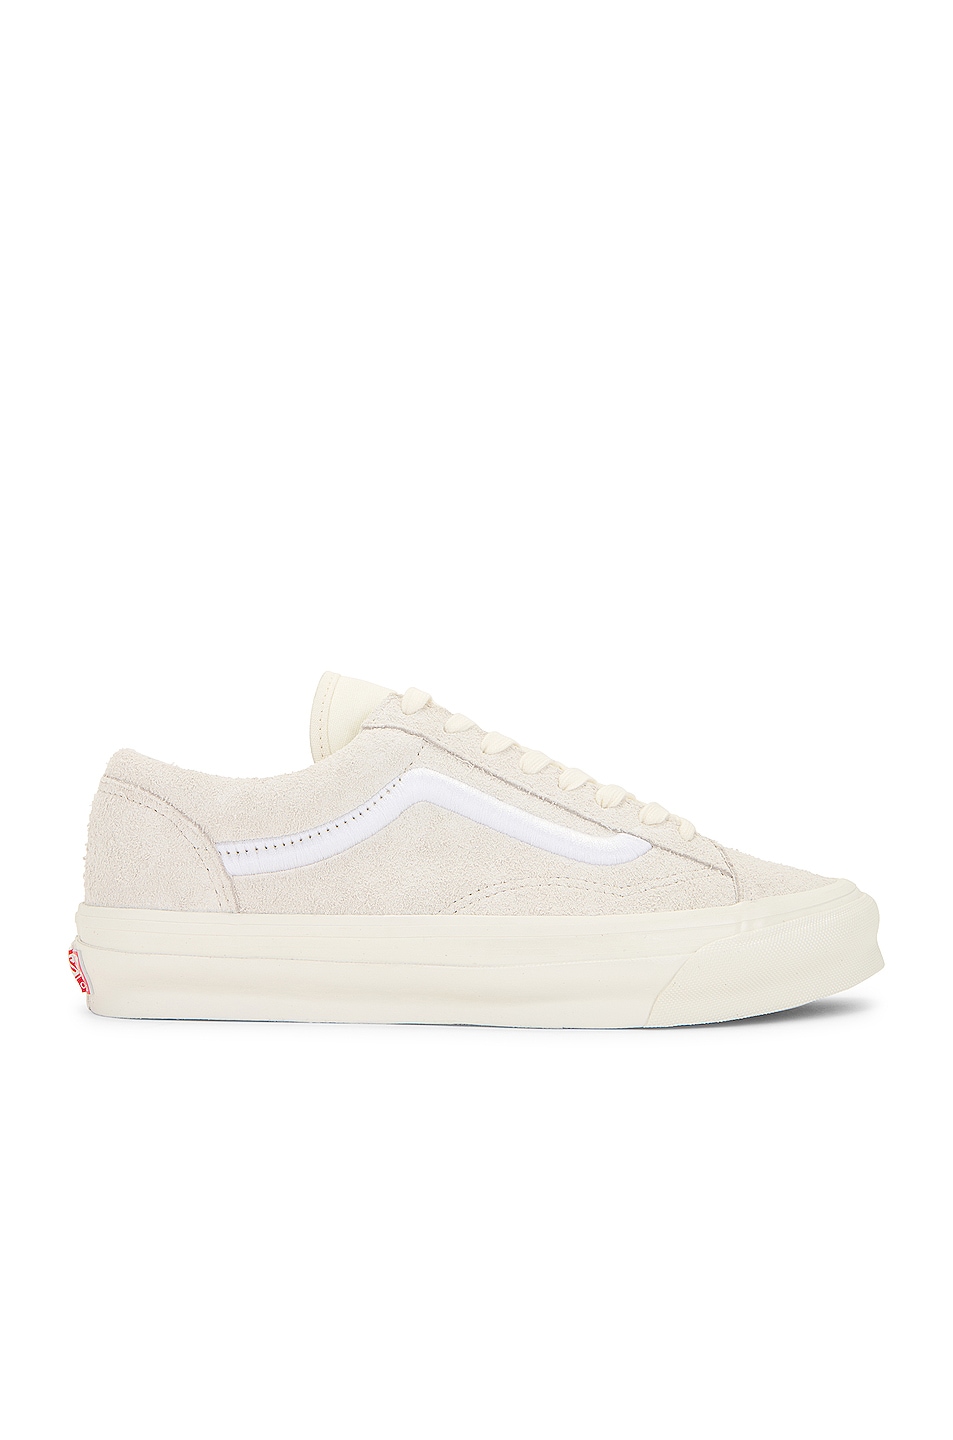 Image 1 of Vans Vault Og Style 36 Lx in Cooperstown Marshmallow & White